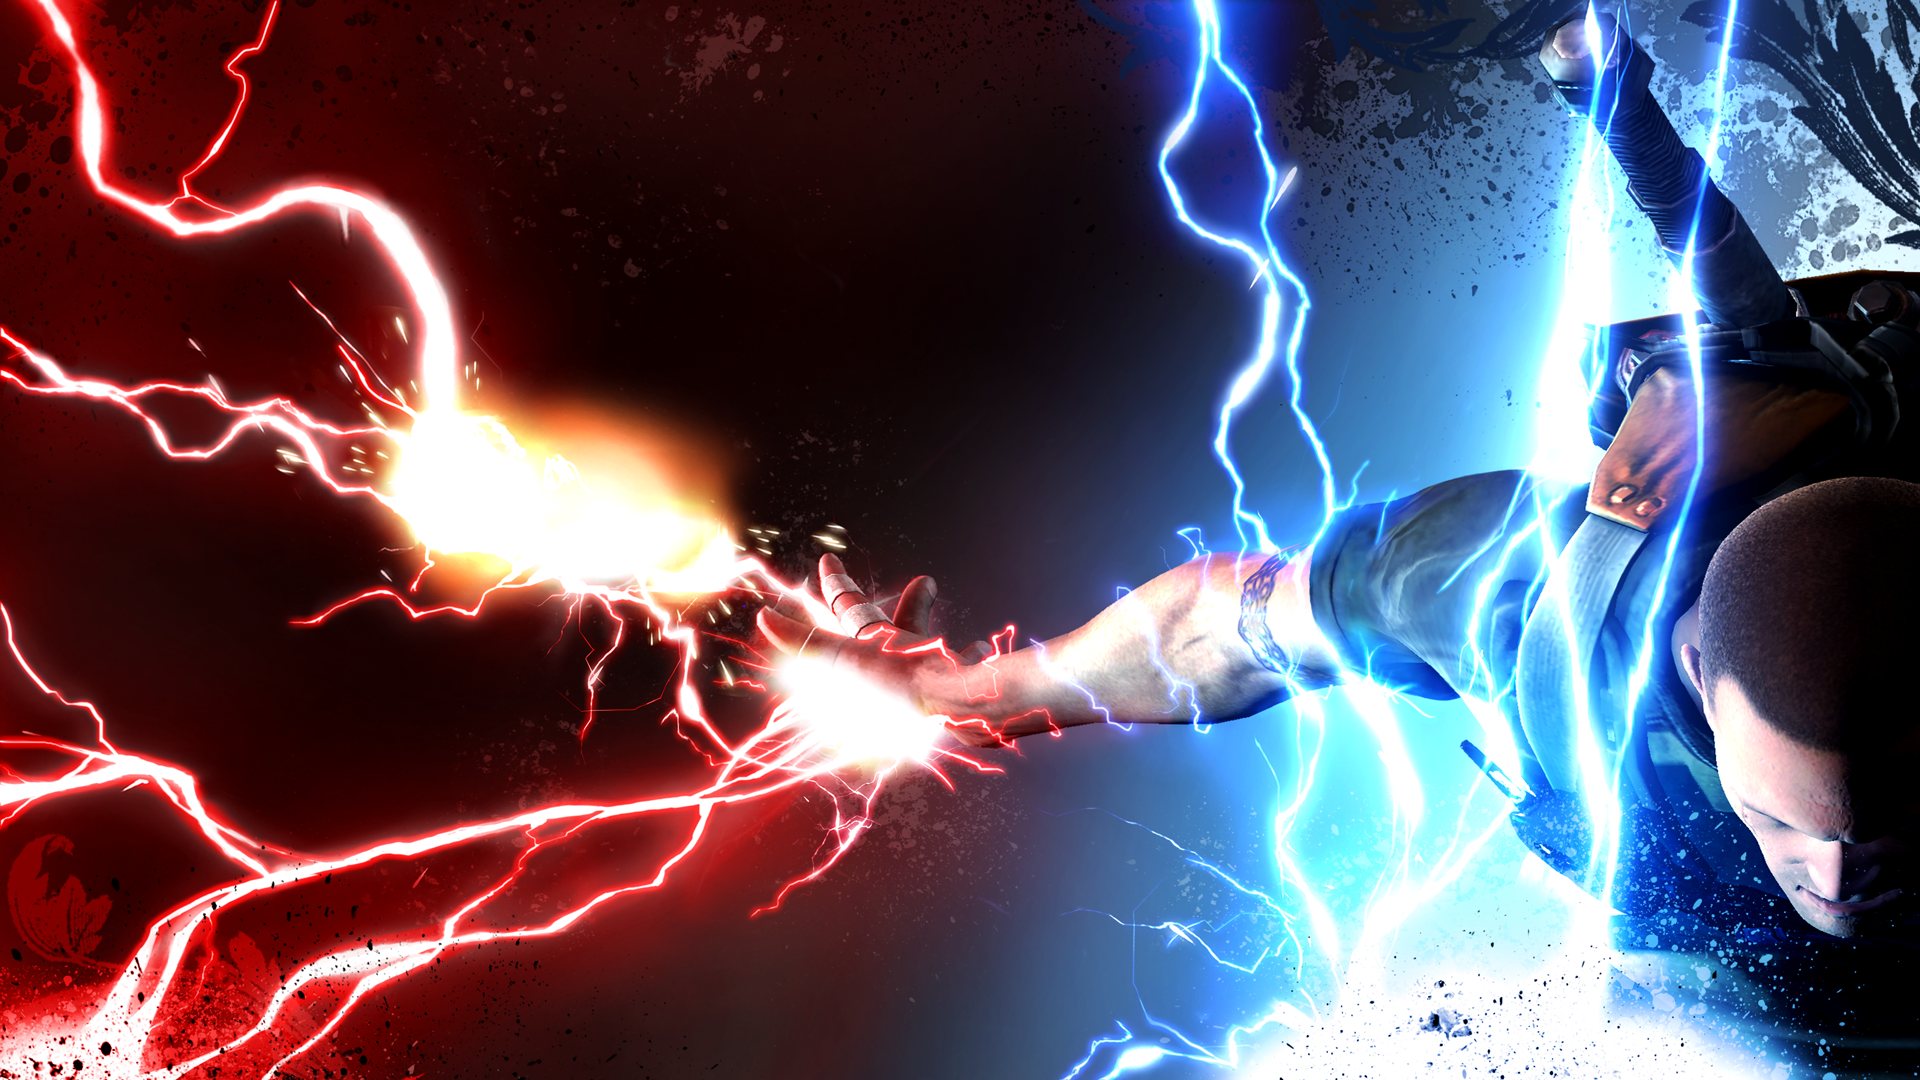 Infamous 2 HD Wallpapers